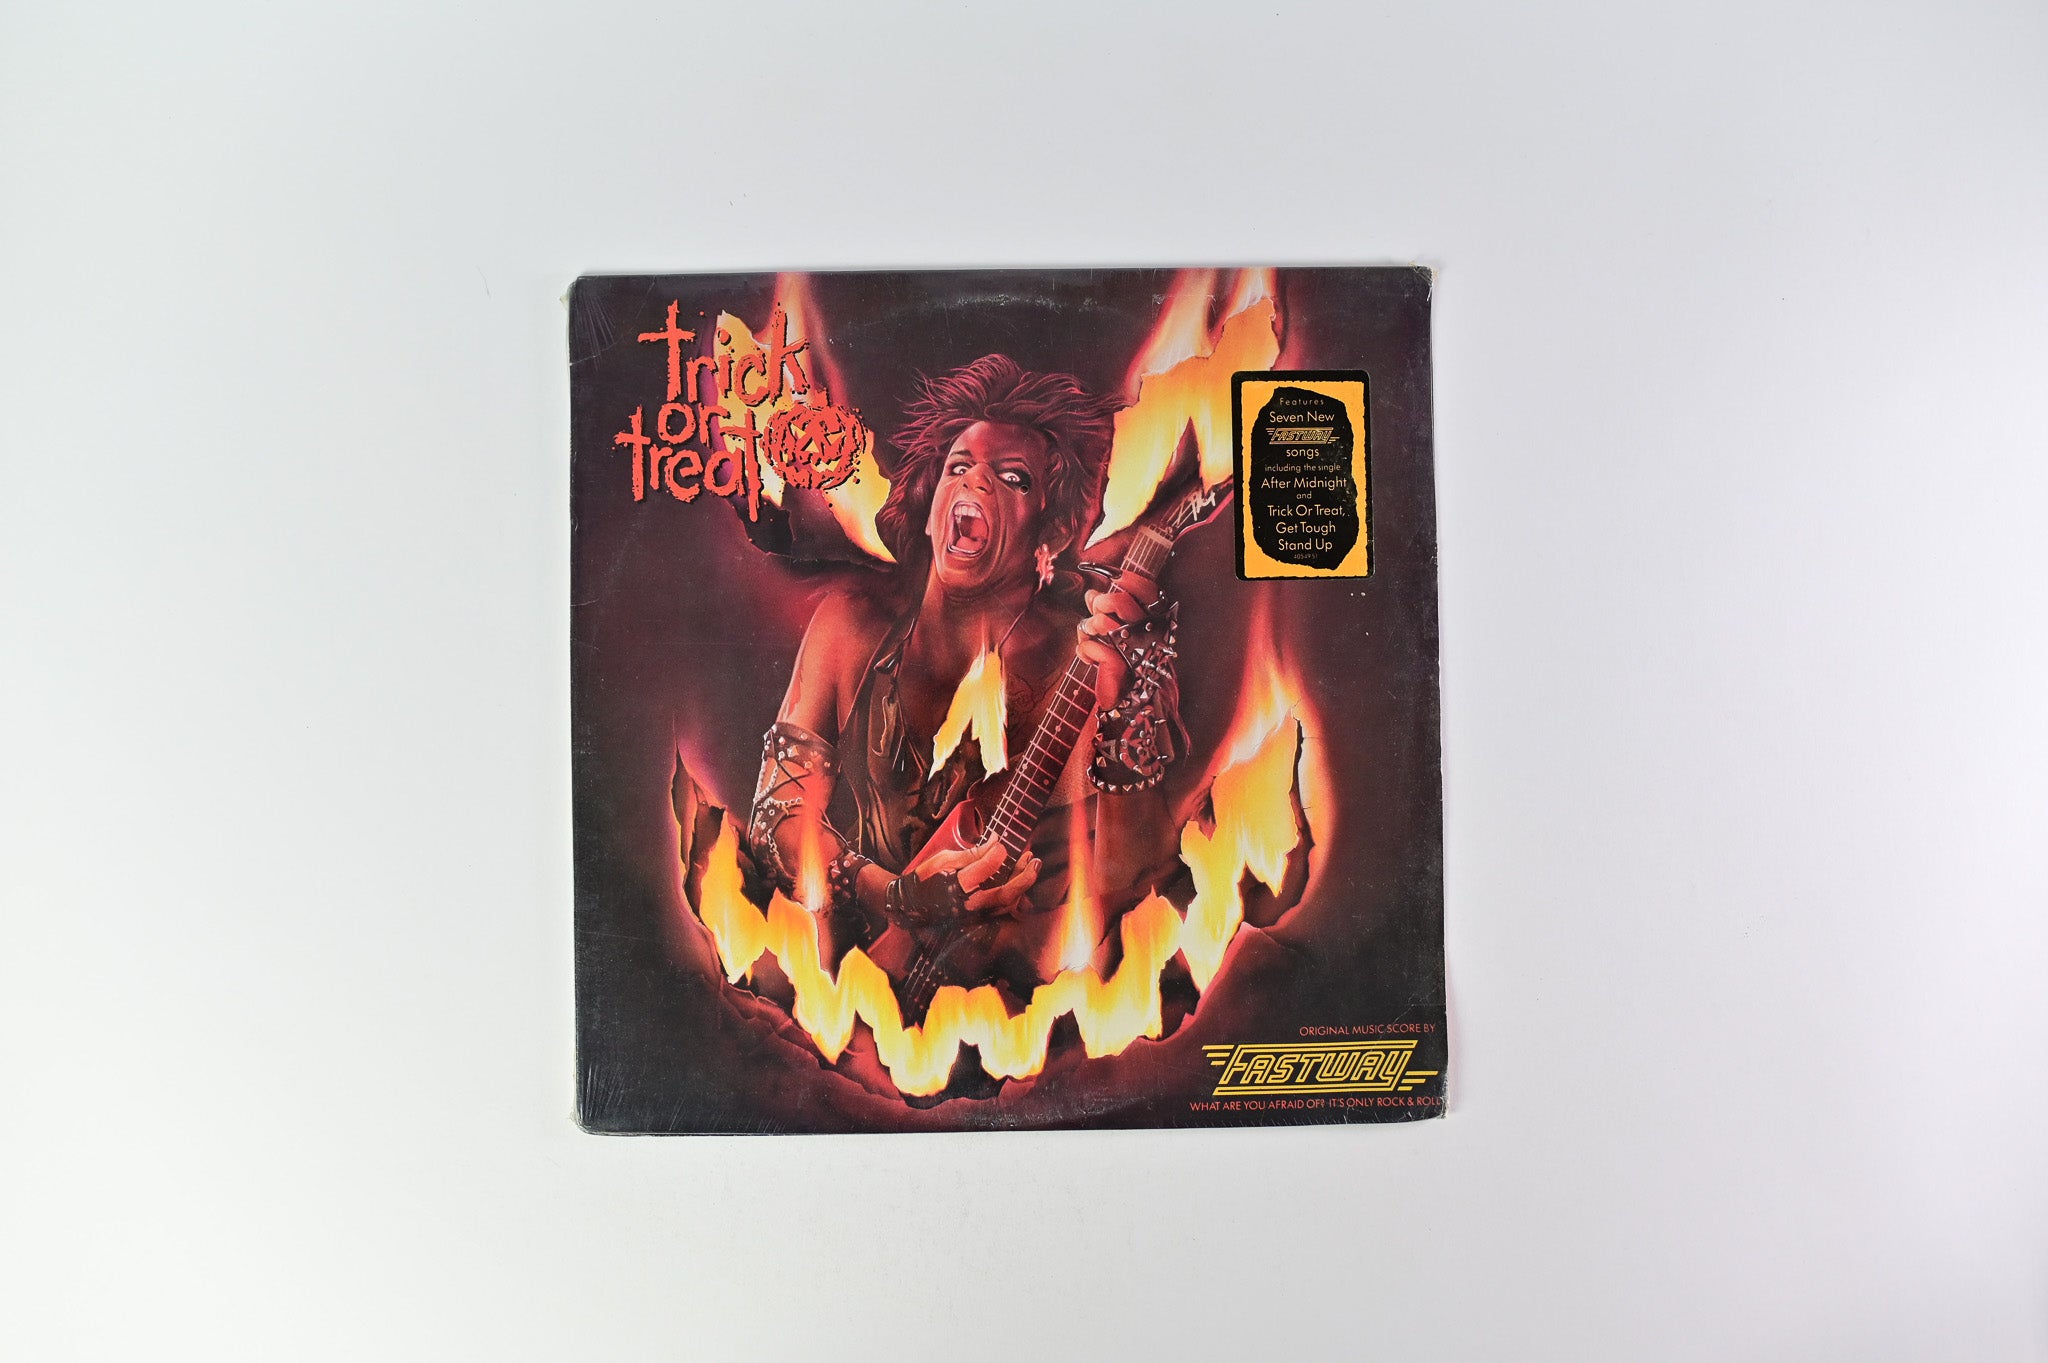 Fastway - Trick Or Treat - Original Motion Picture Soundtrack on Columbia Sealed